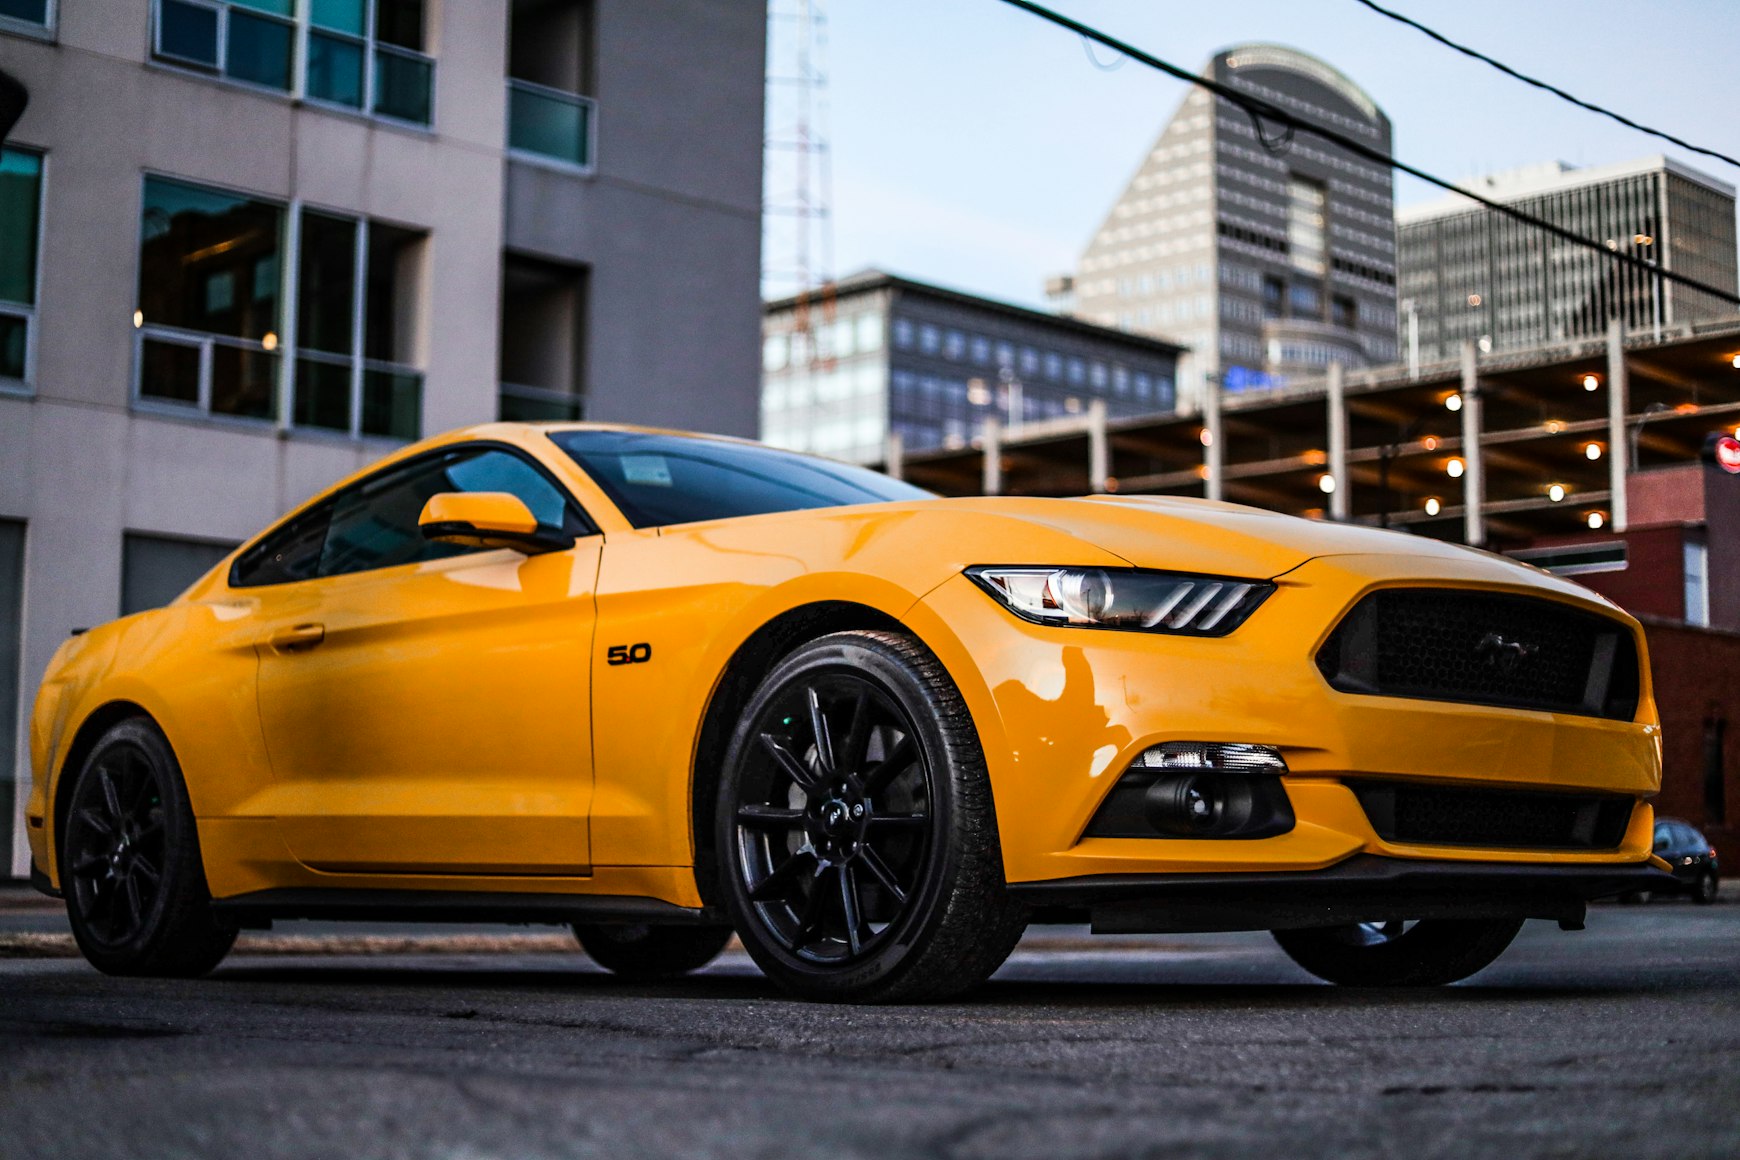 Yellow Ford Mustang parked in front of a cityscape.